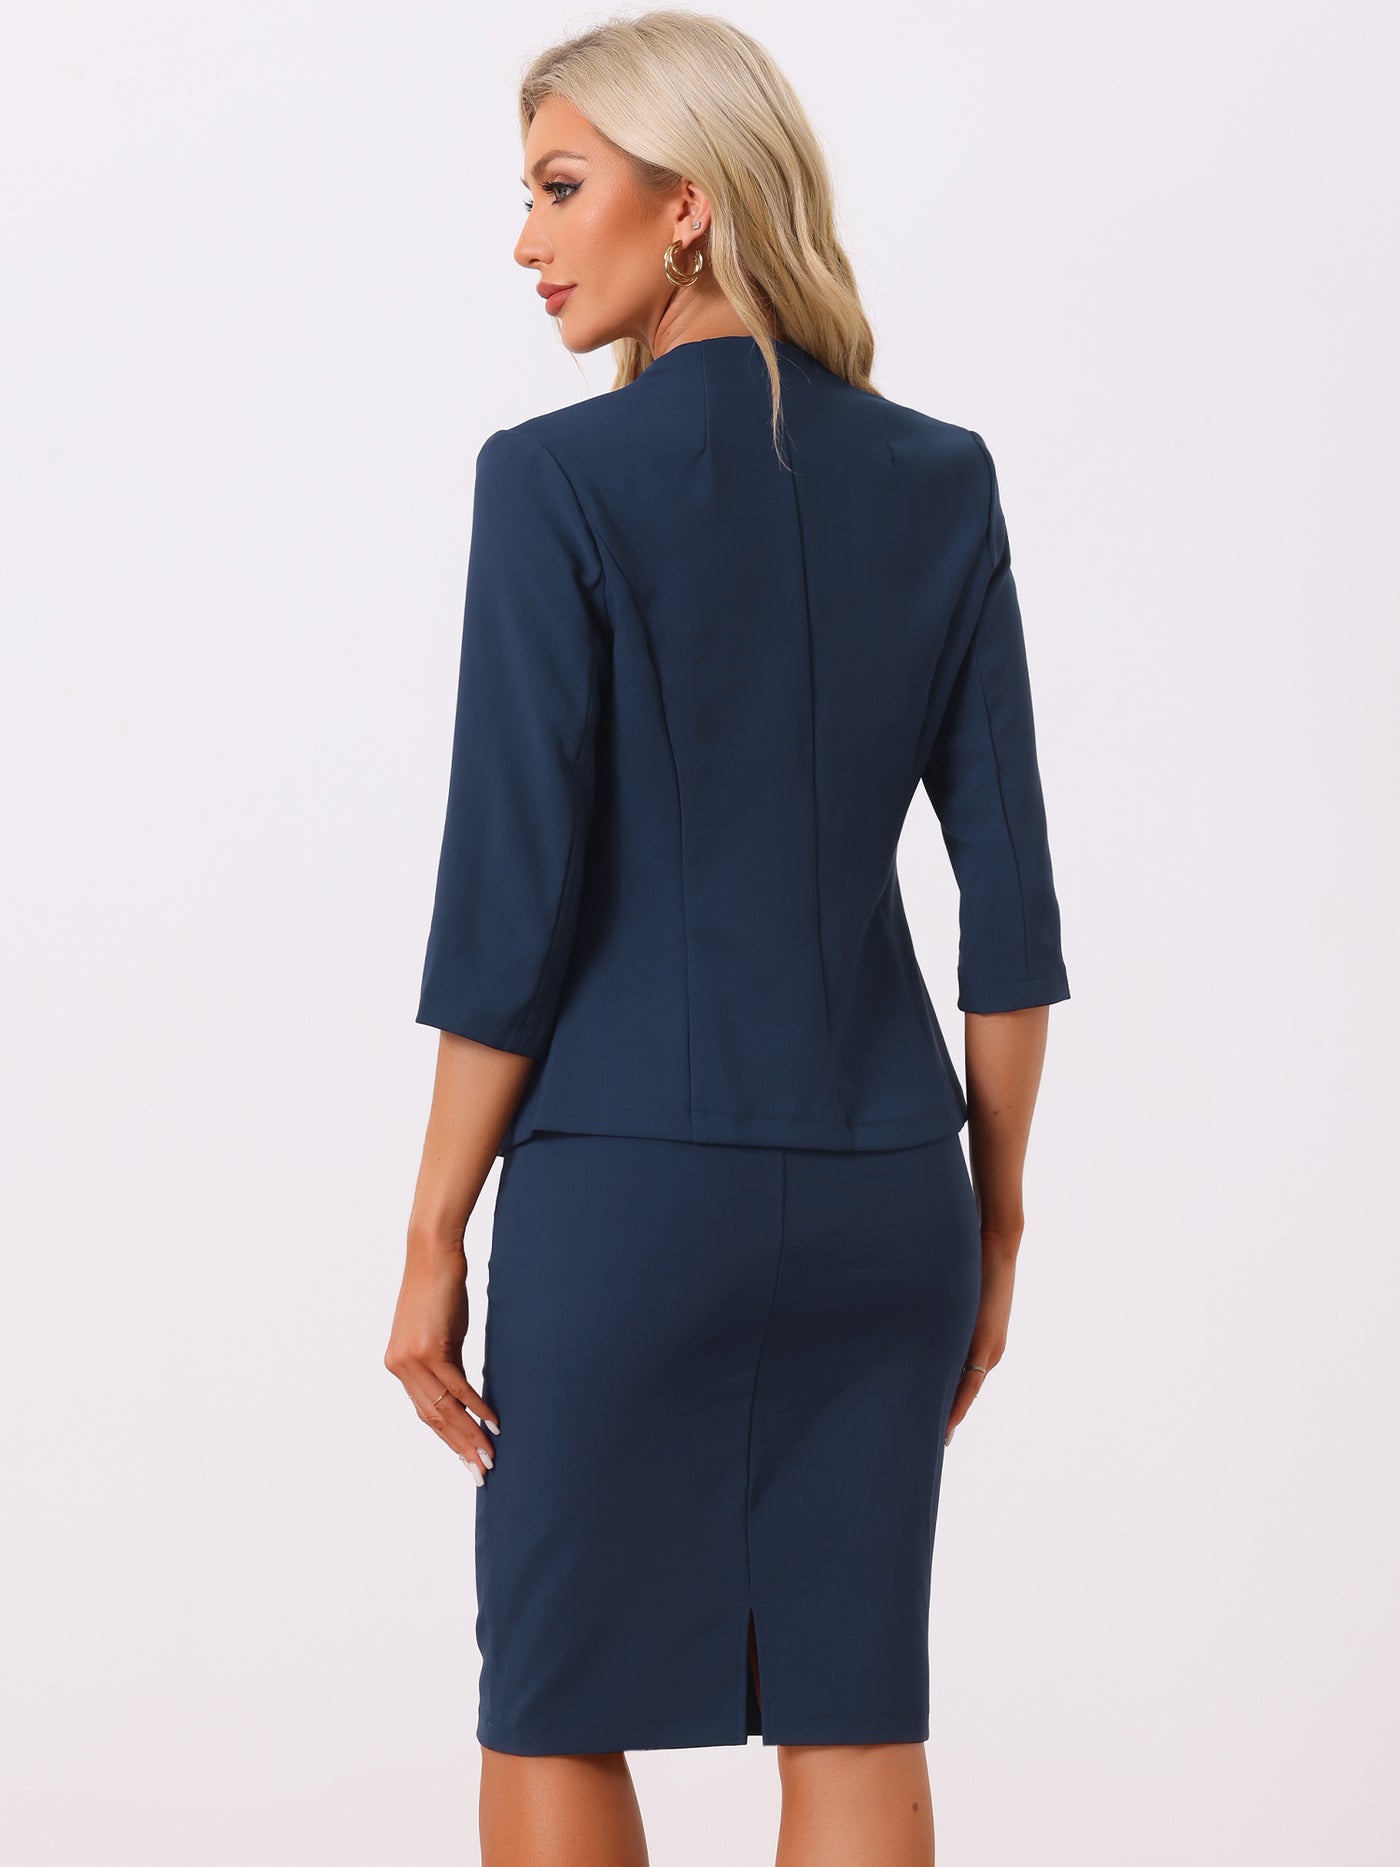 Allegra K 2 Pieces Office Work Outfit Collarless Blazer and Pencil Skirt Business Skirt Suit Set